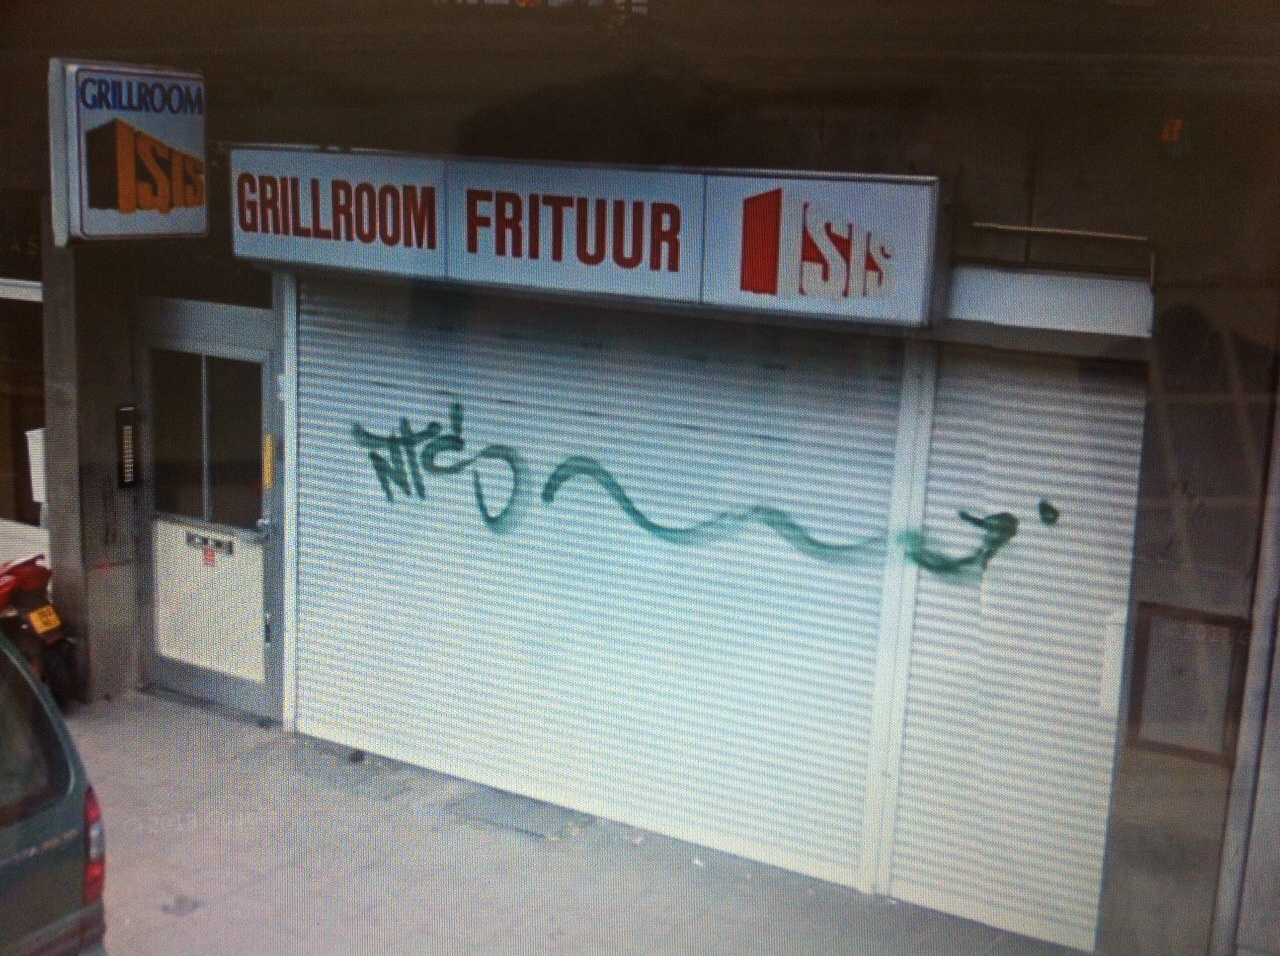 A picture of grillroom ISIS